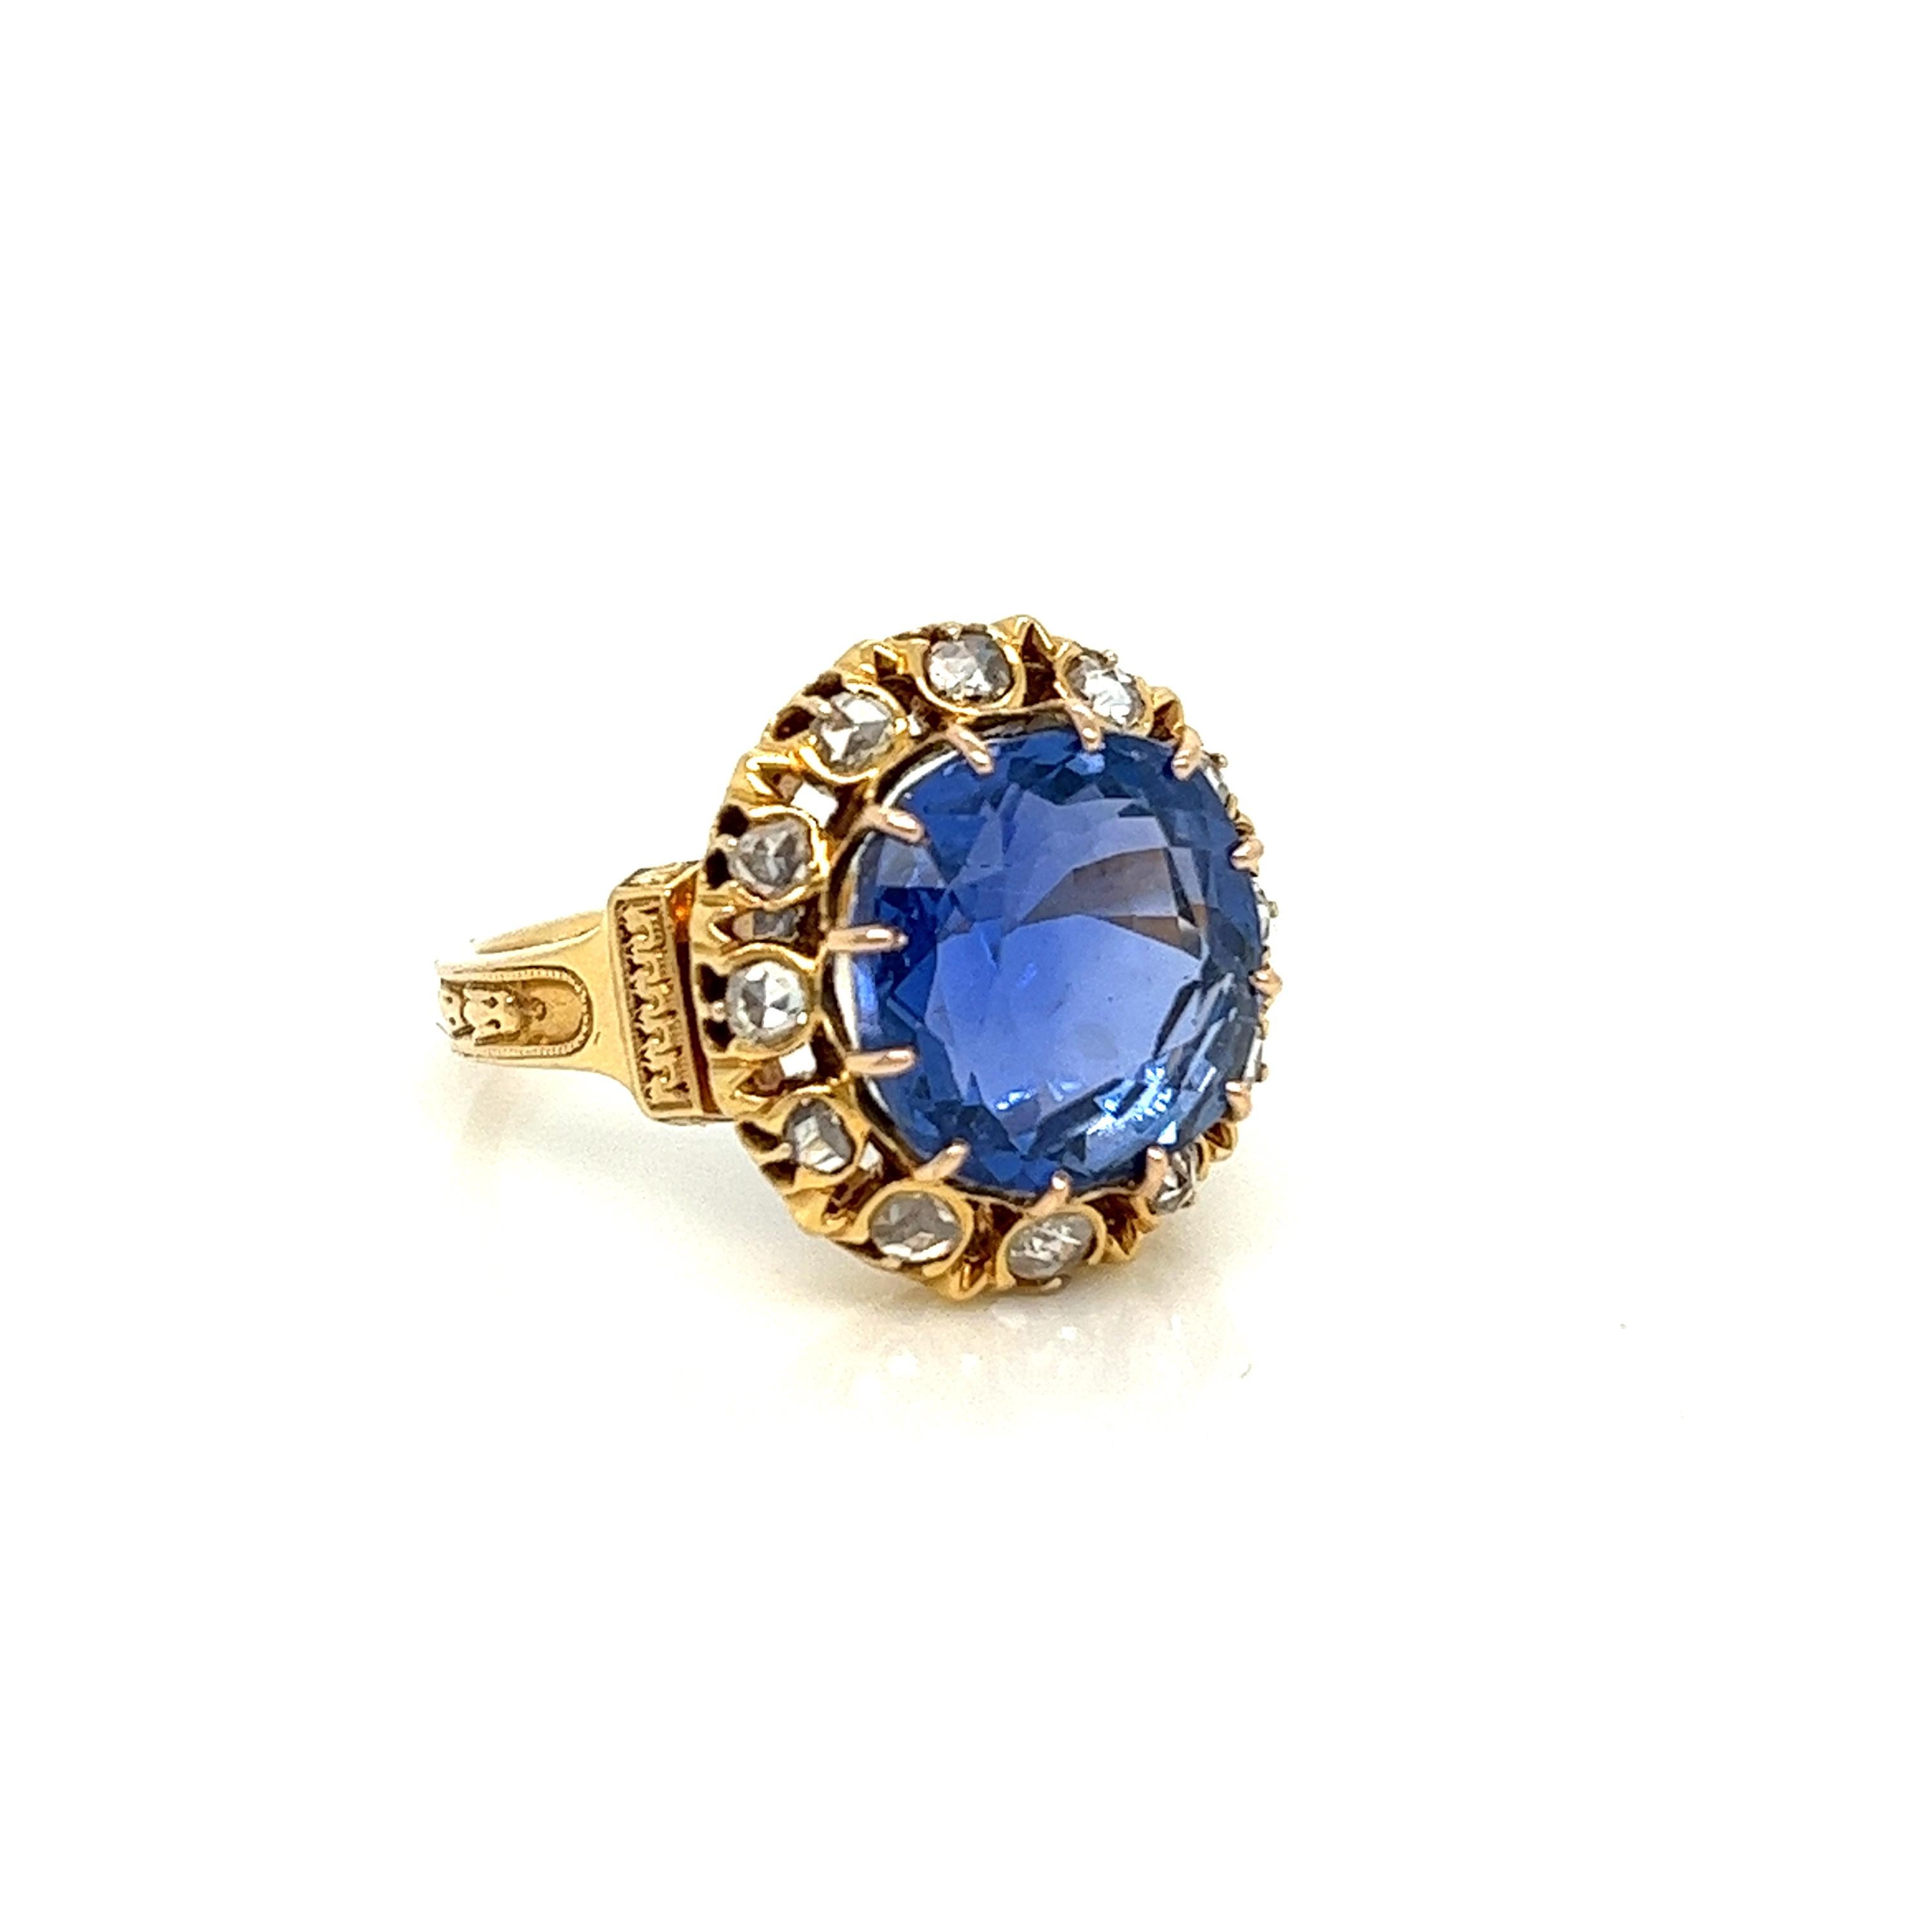 We can just stare at this buttery gold and blue combination all day! A sizeable 10.74 carat Burmese sapphire centers this Victorian-era piece. The stone is graded as unheated by SSEF and has the most beautiful blue hue. A halo of antique rose cuts